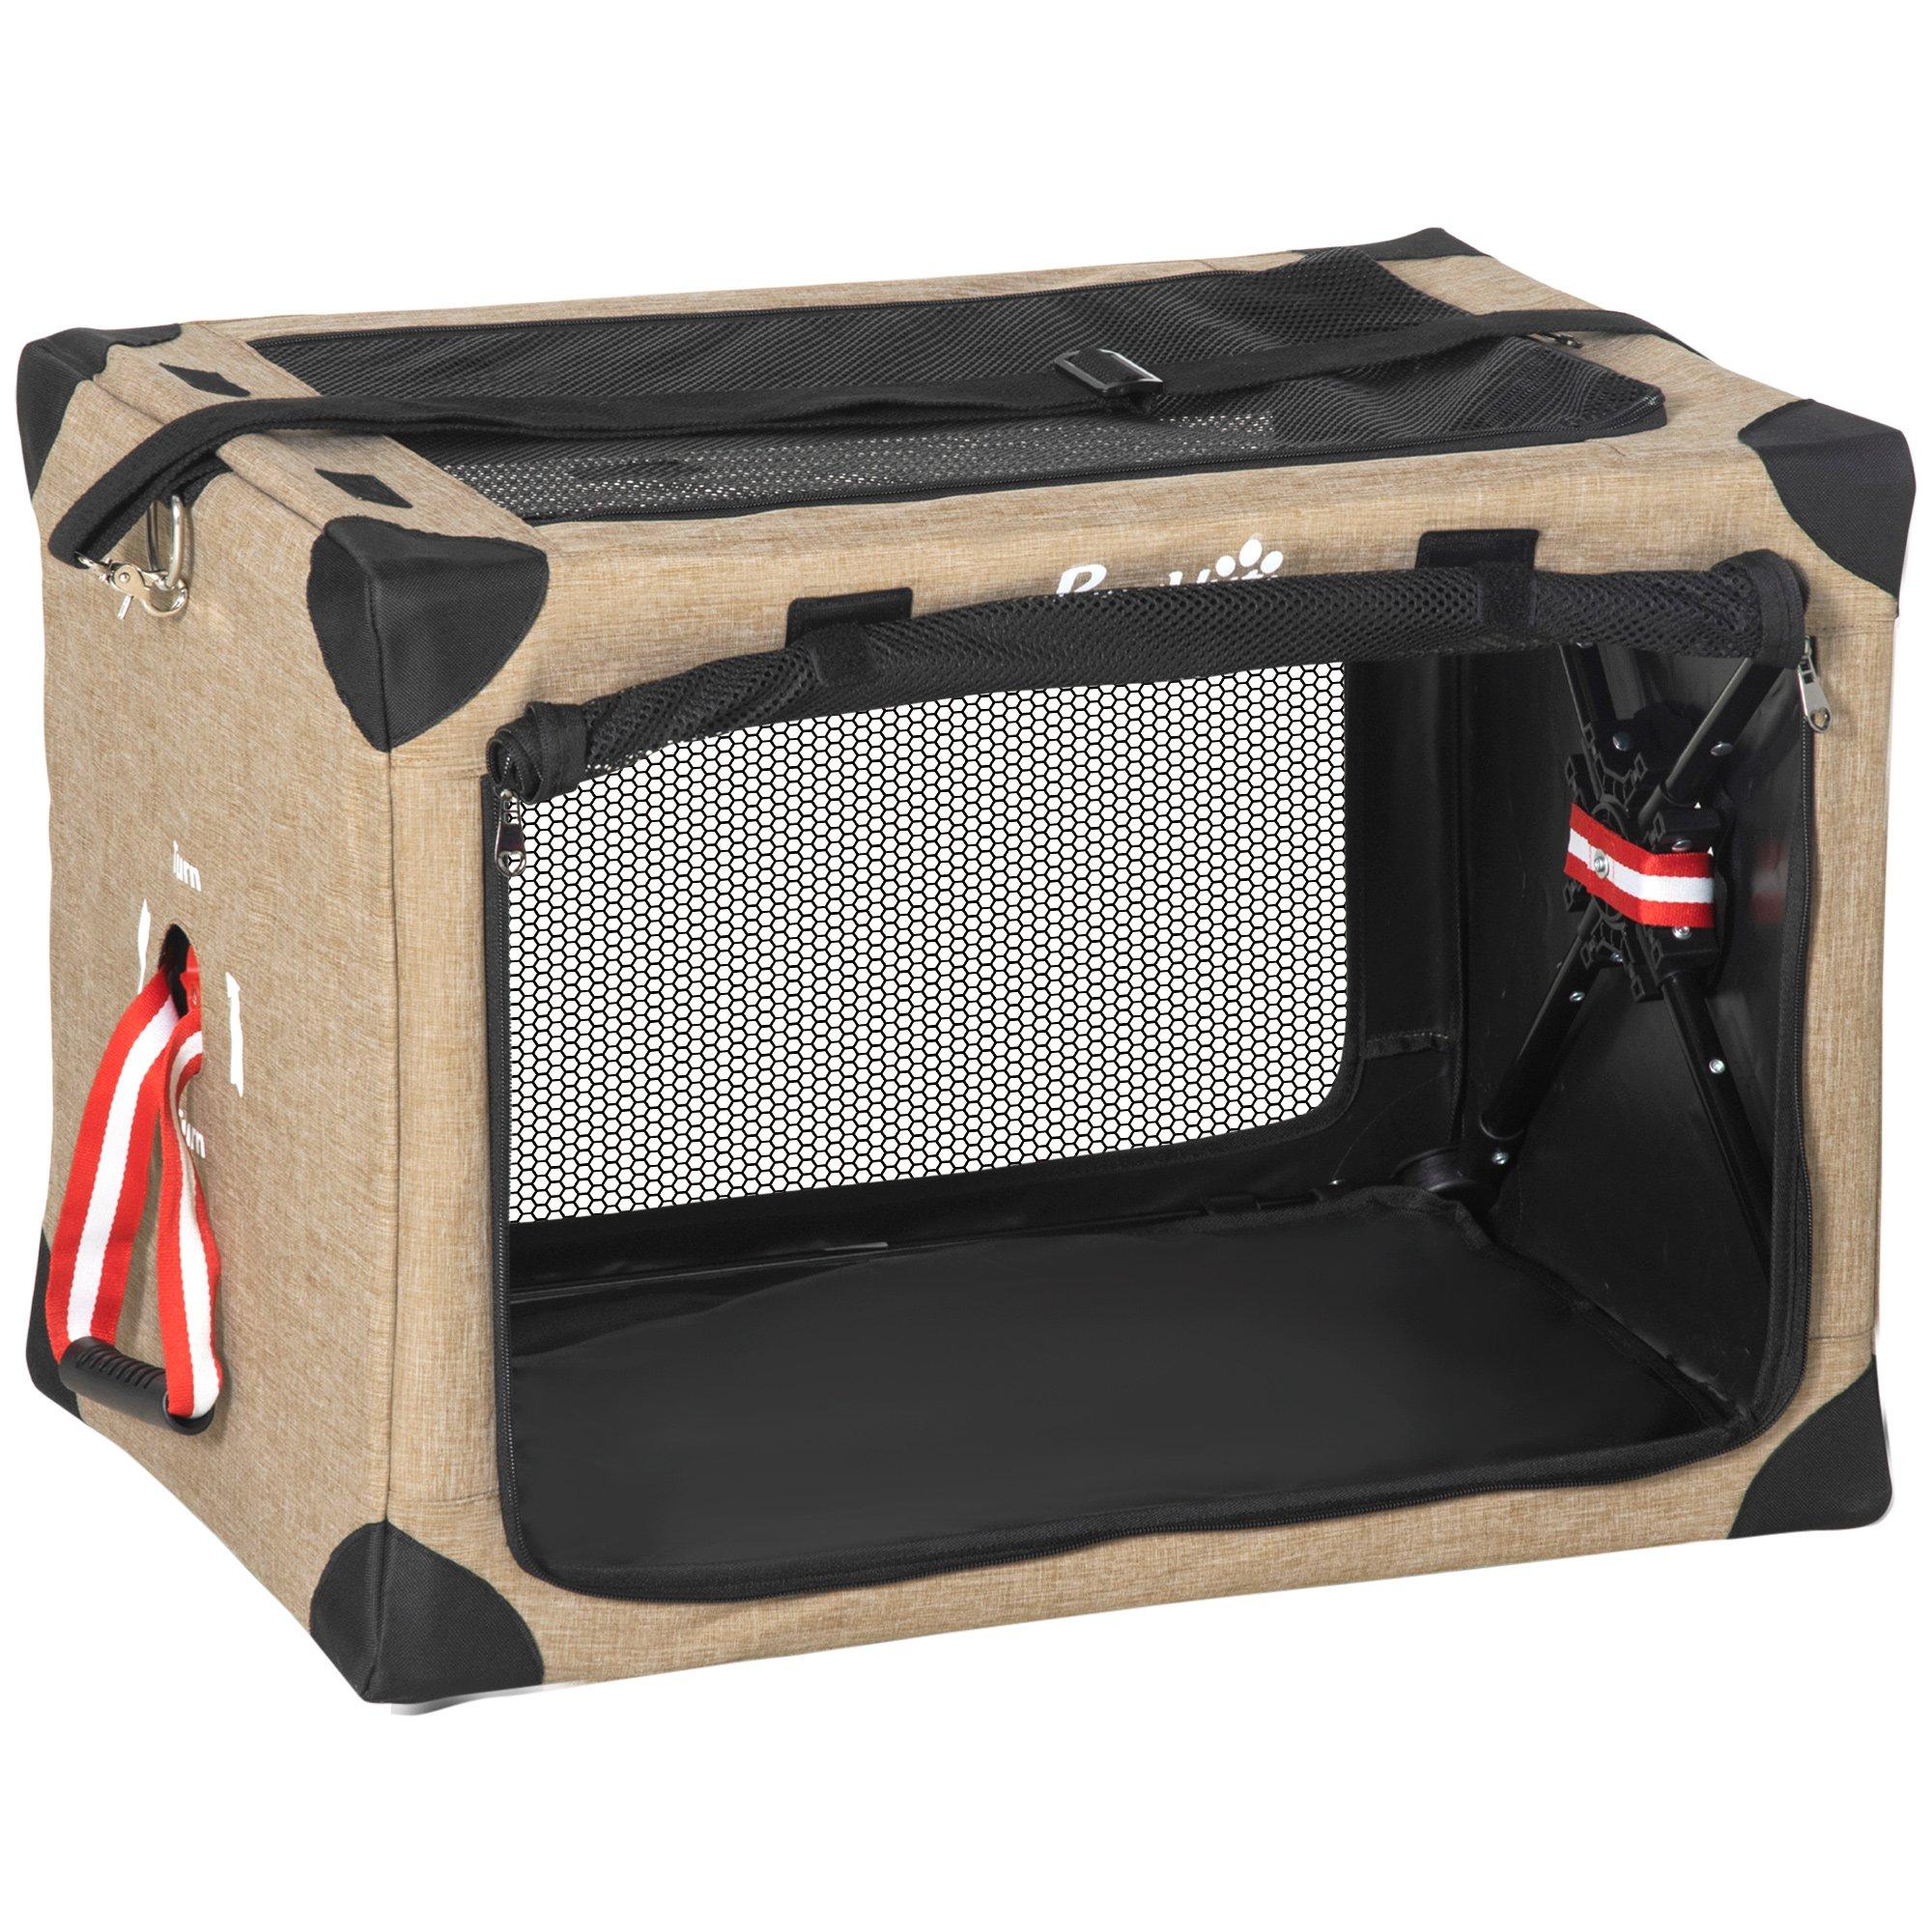 Collapsible Dog Crate Foldable Pet Carrier for Cats Small Dog 65x45x45cm